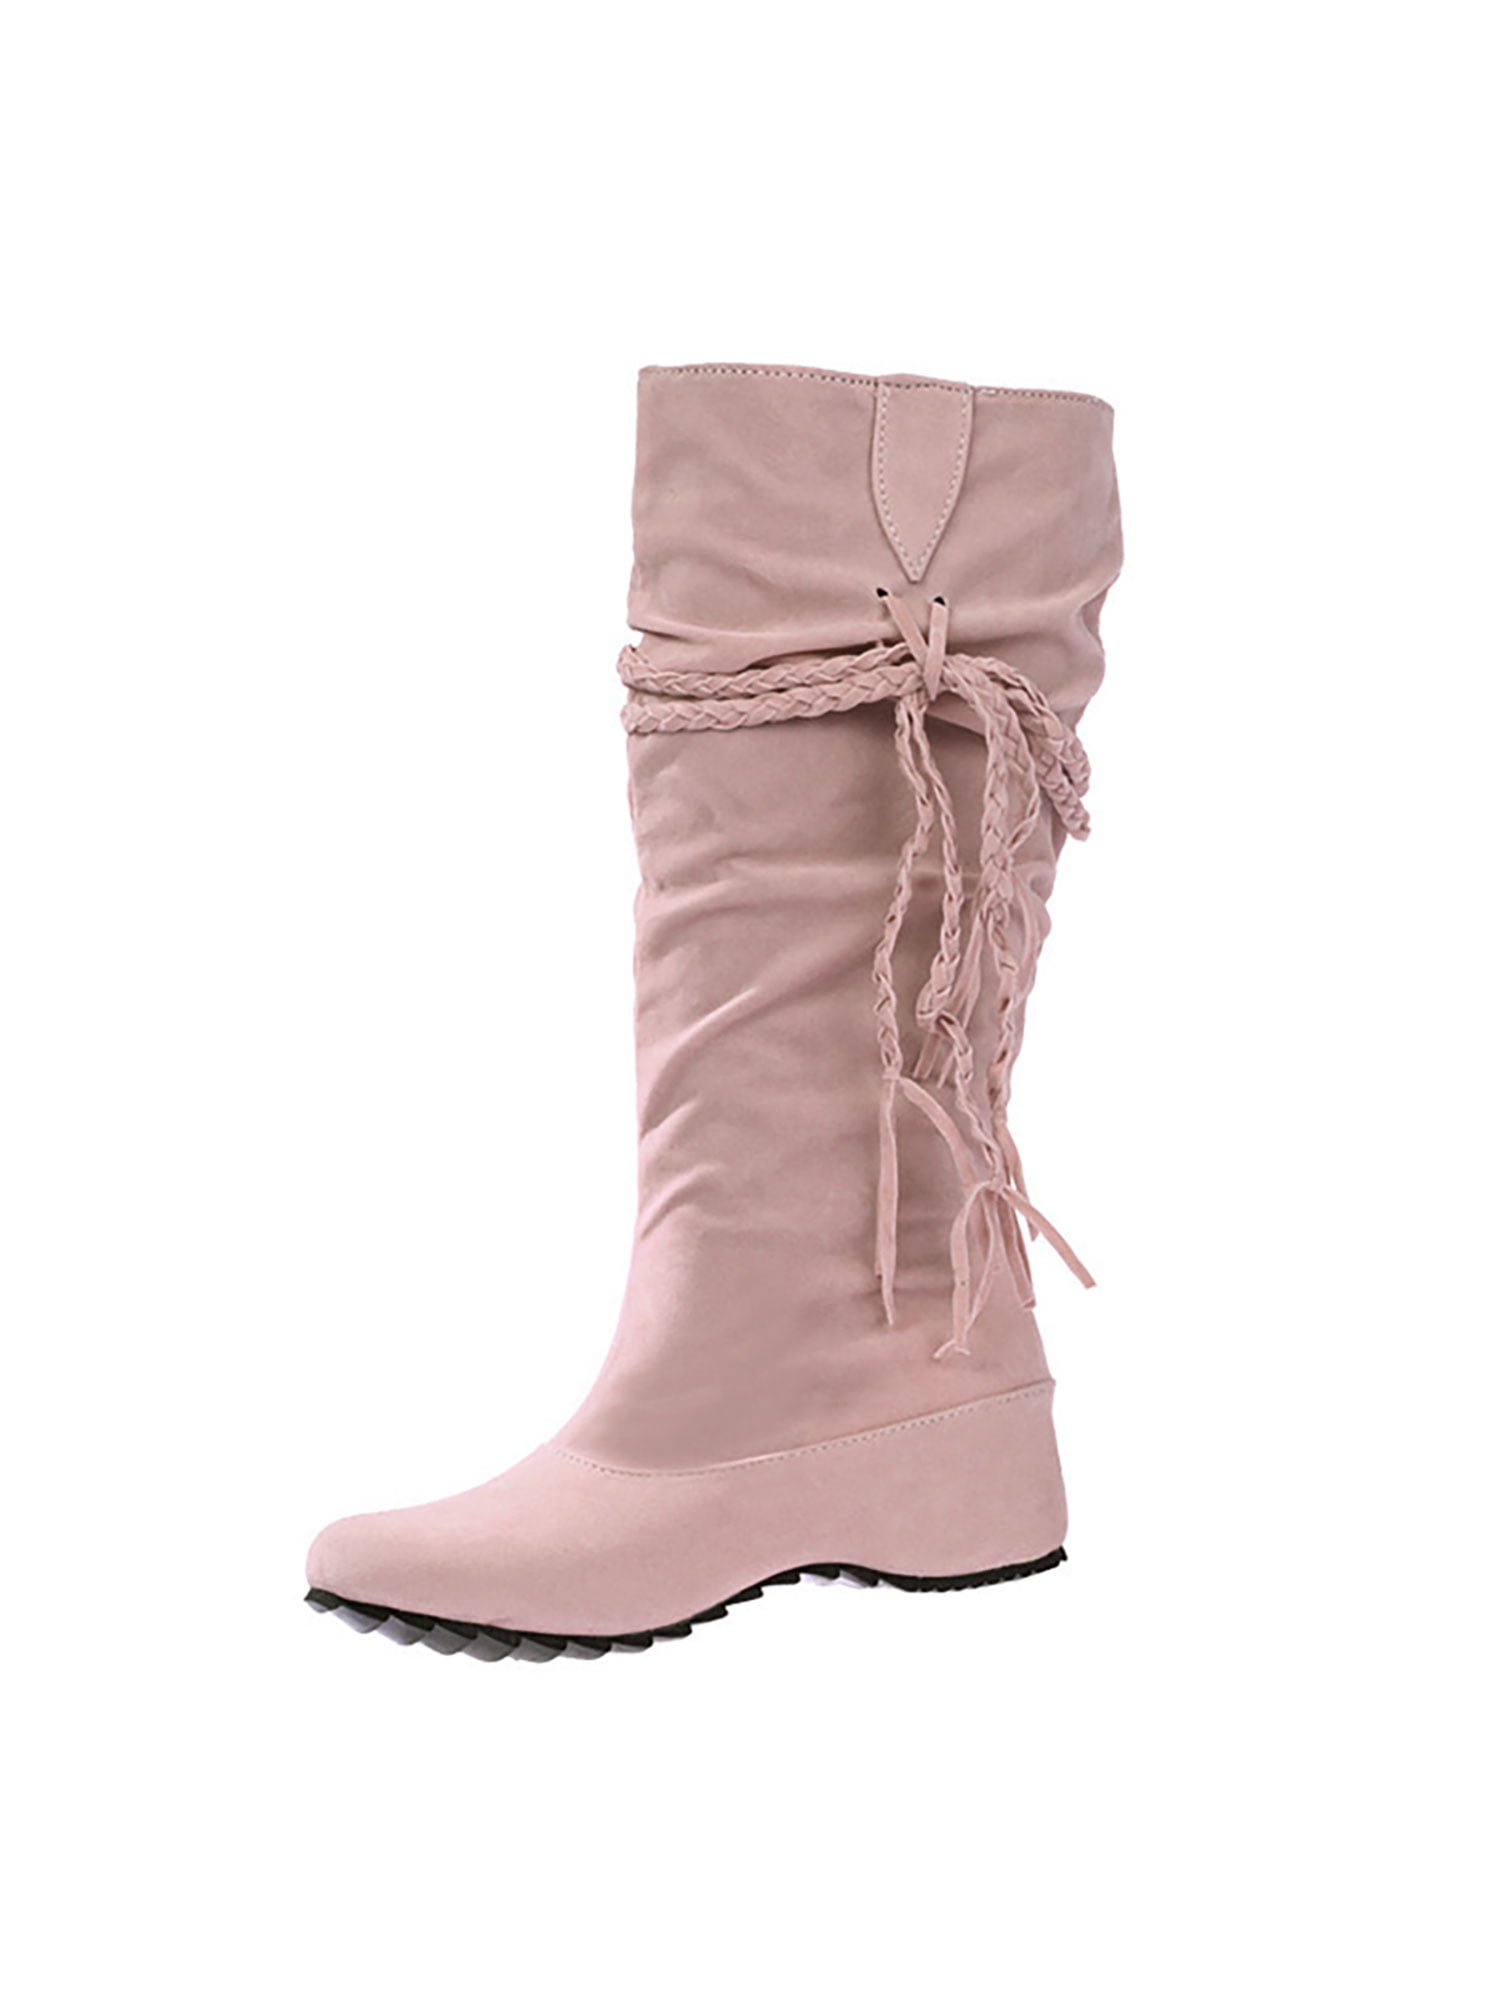 Winter Ymiytan Fashion Women\'s Pink Flat Pull 6.5 On Boots Boot Slouchy High Knee